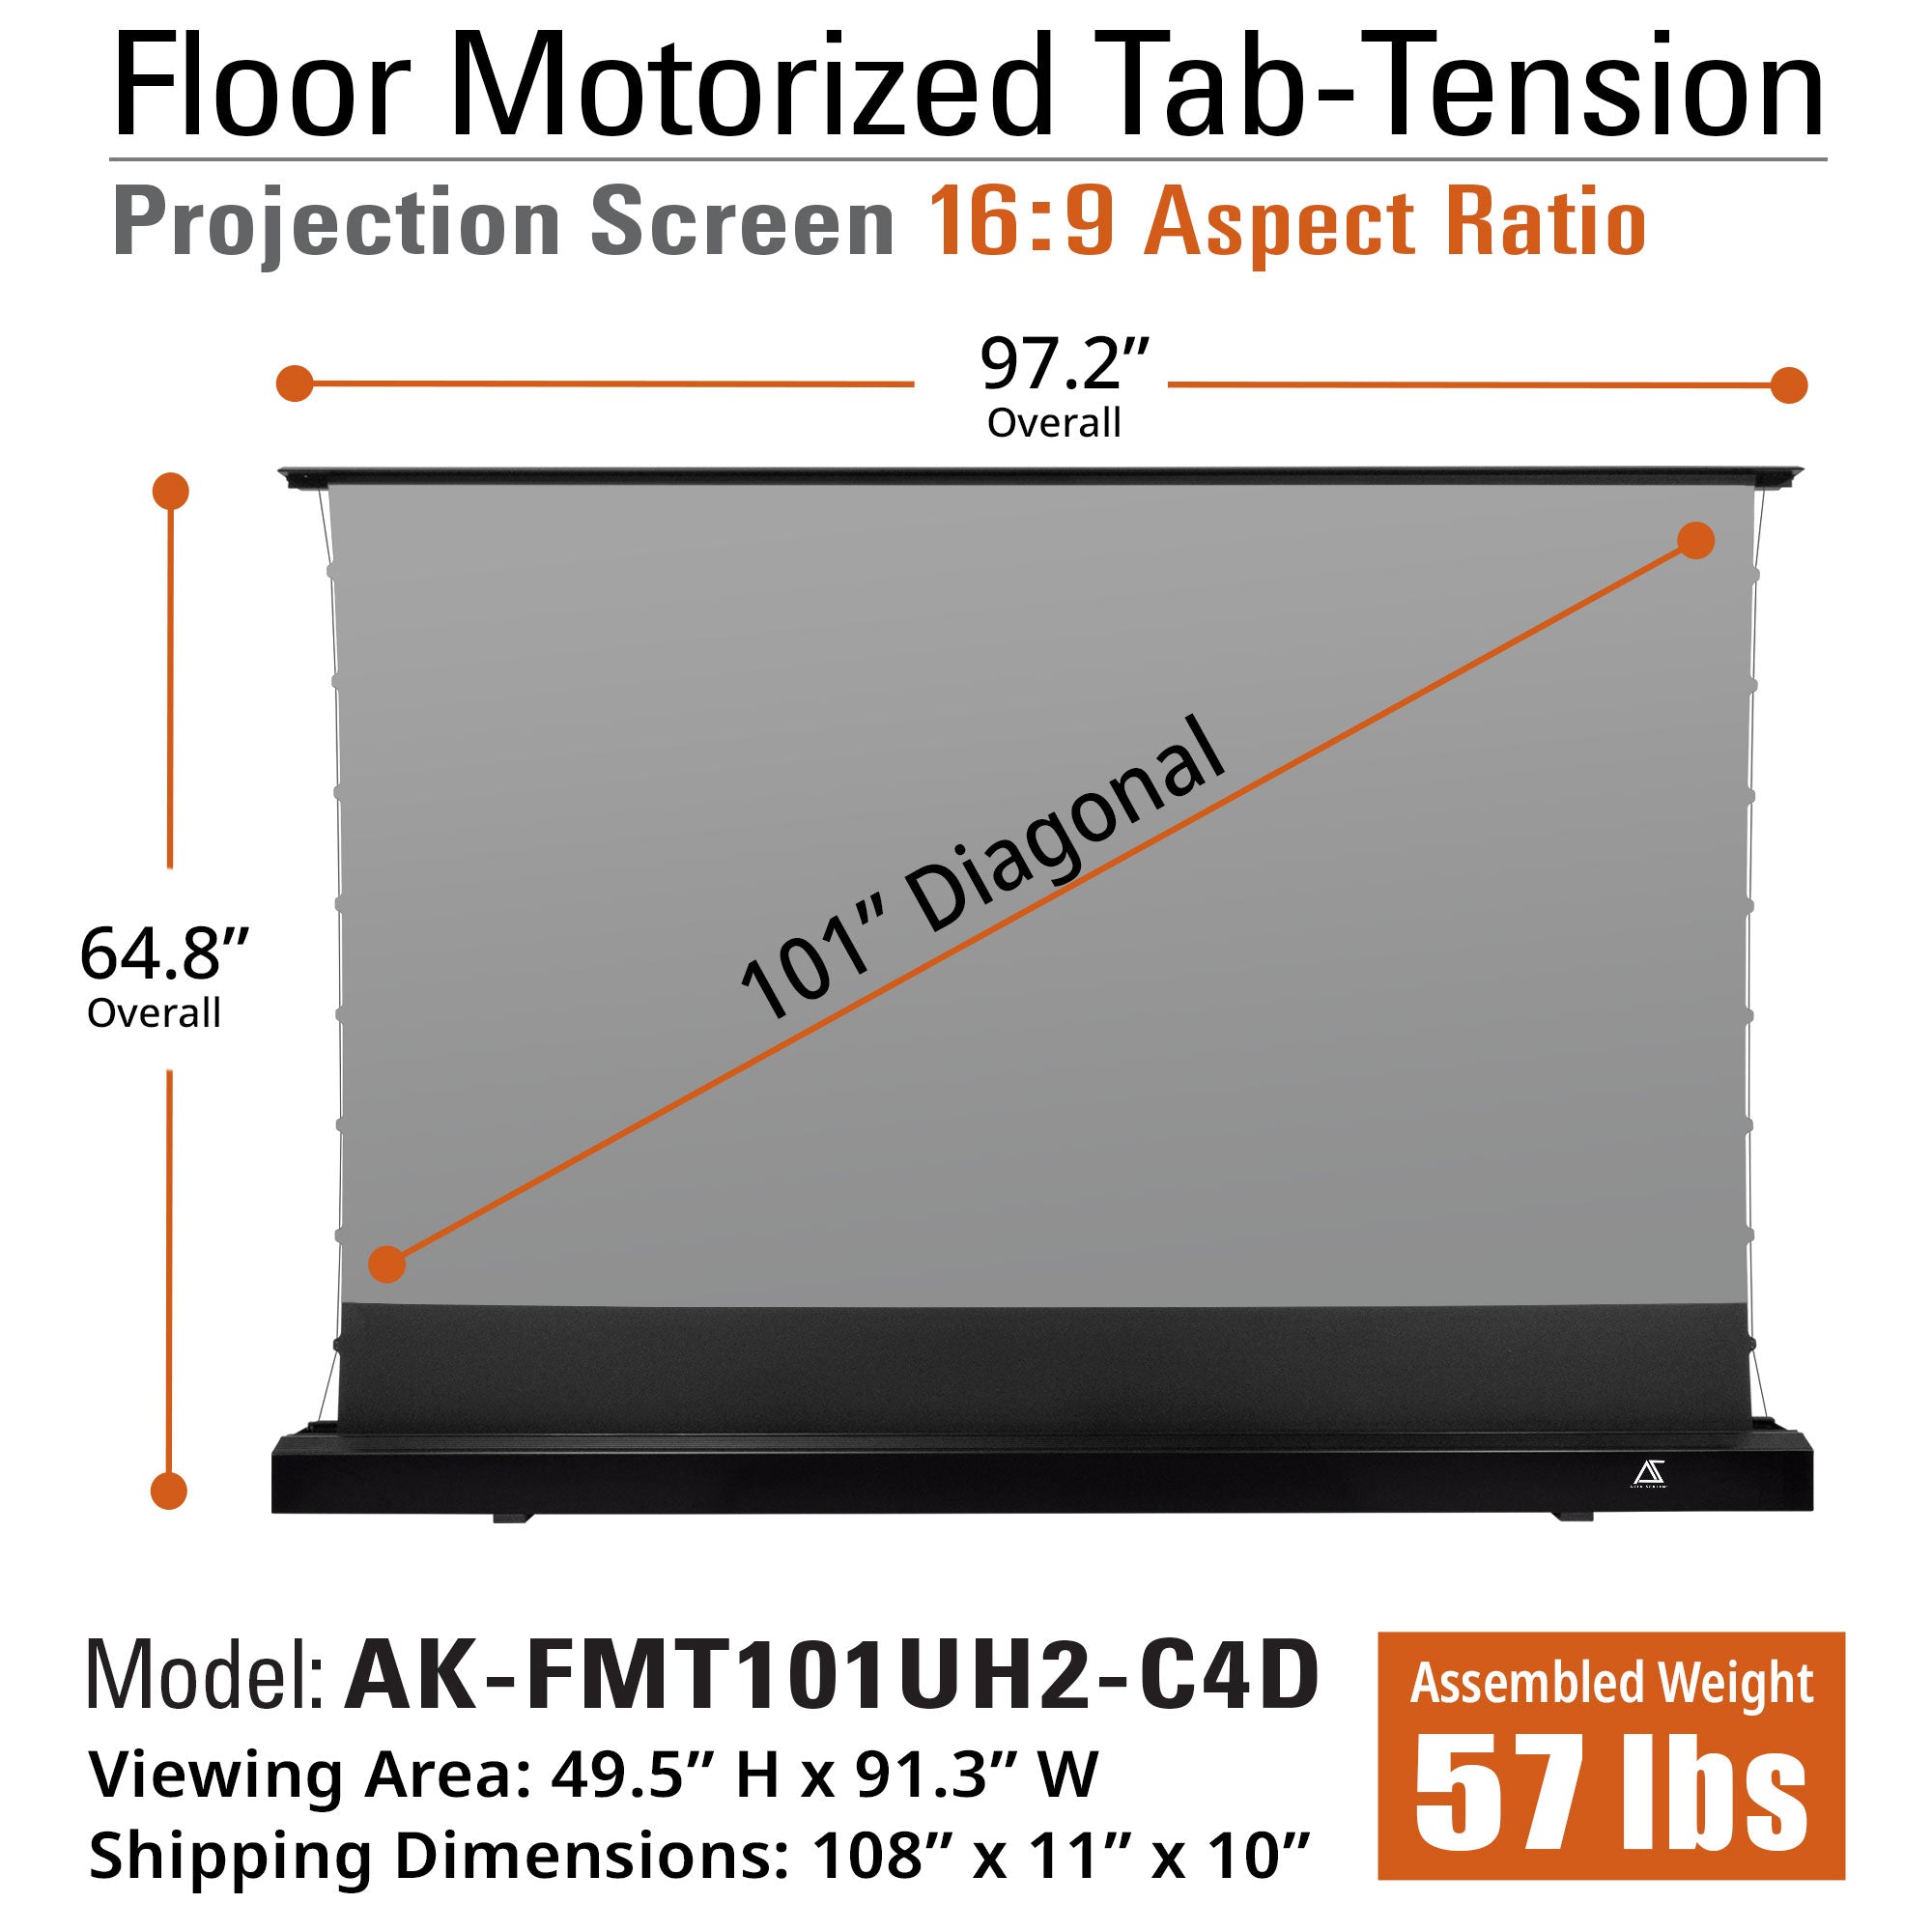 Floor Motorized Tab-Tension CineGrey 4D Ambient Light Rejecting 